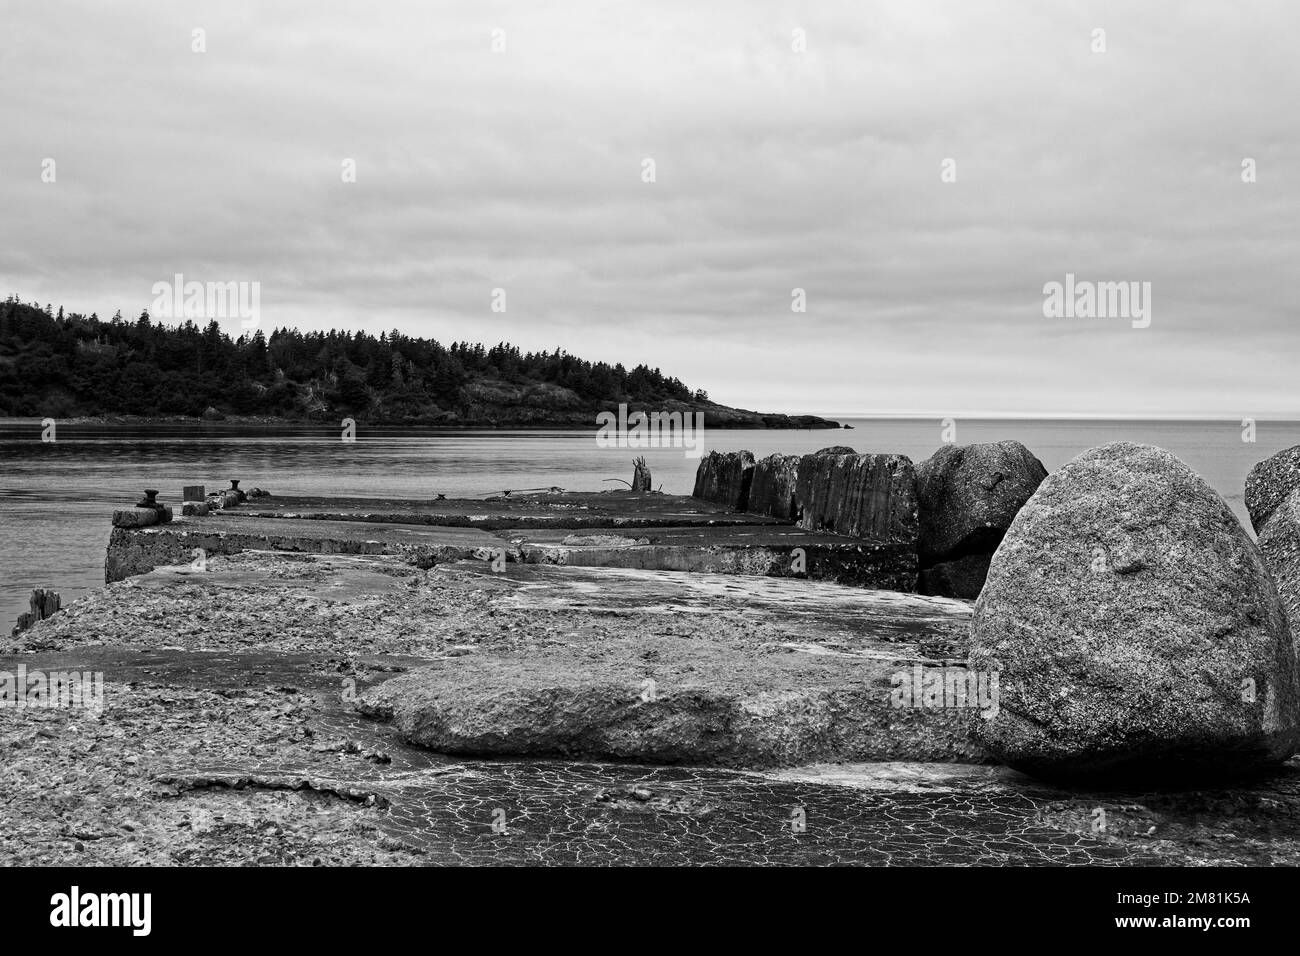 The old dilapidated pier of Sandy Cove, Nova Scotia, in black and white. Stock Photo